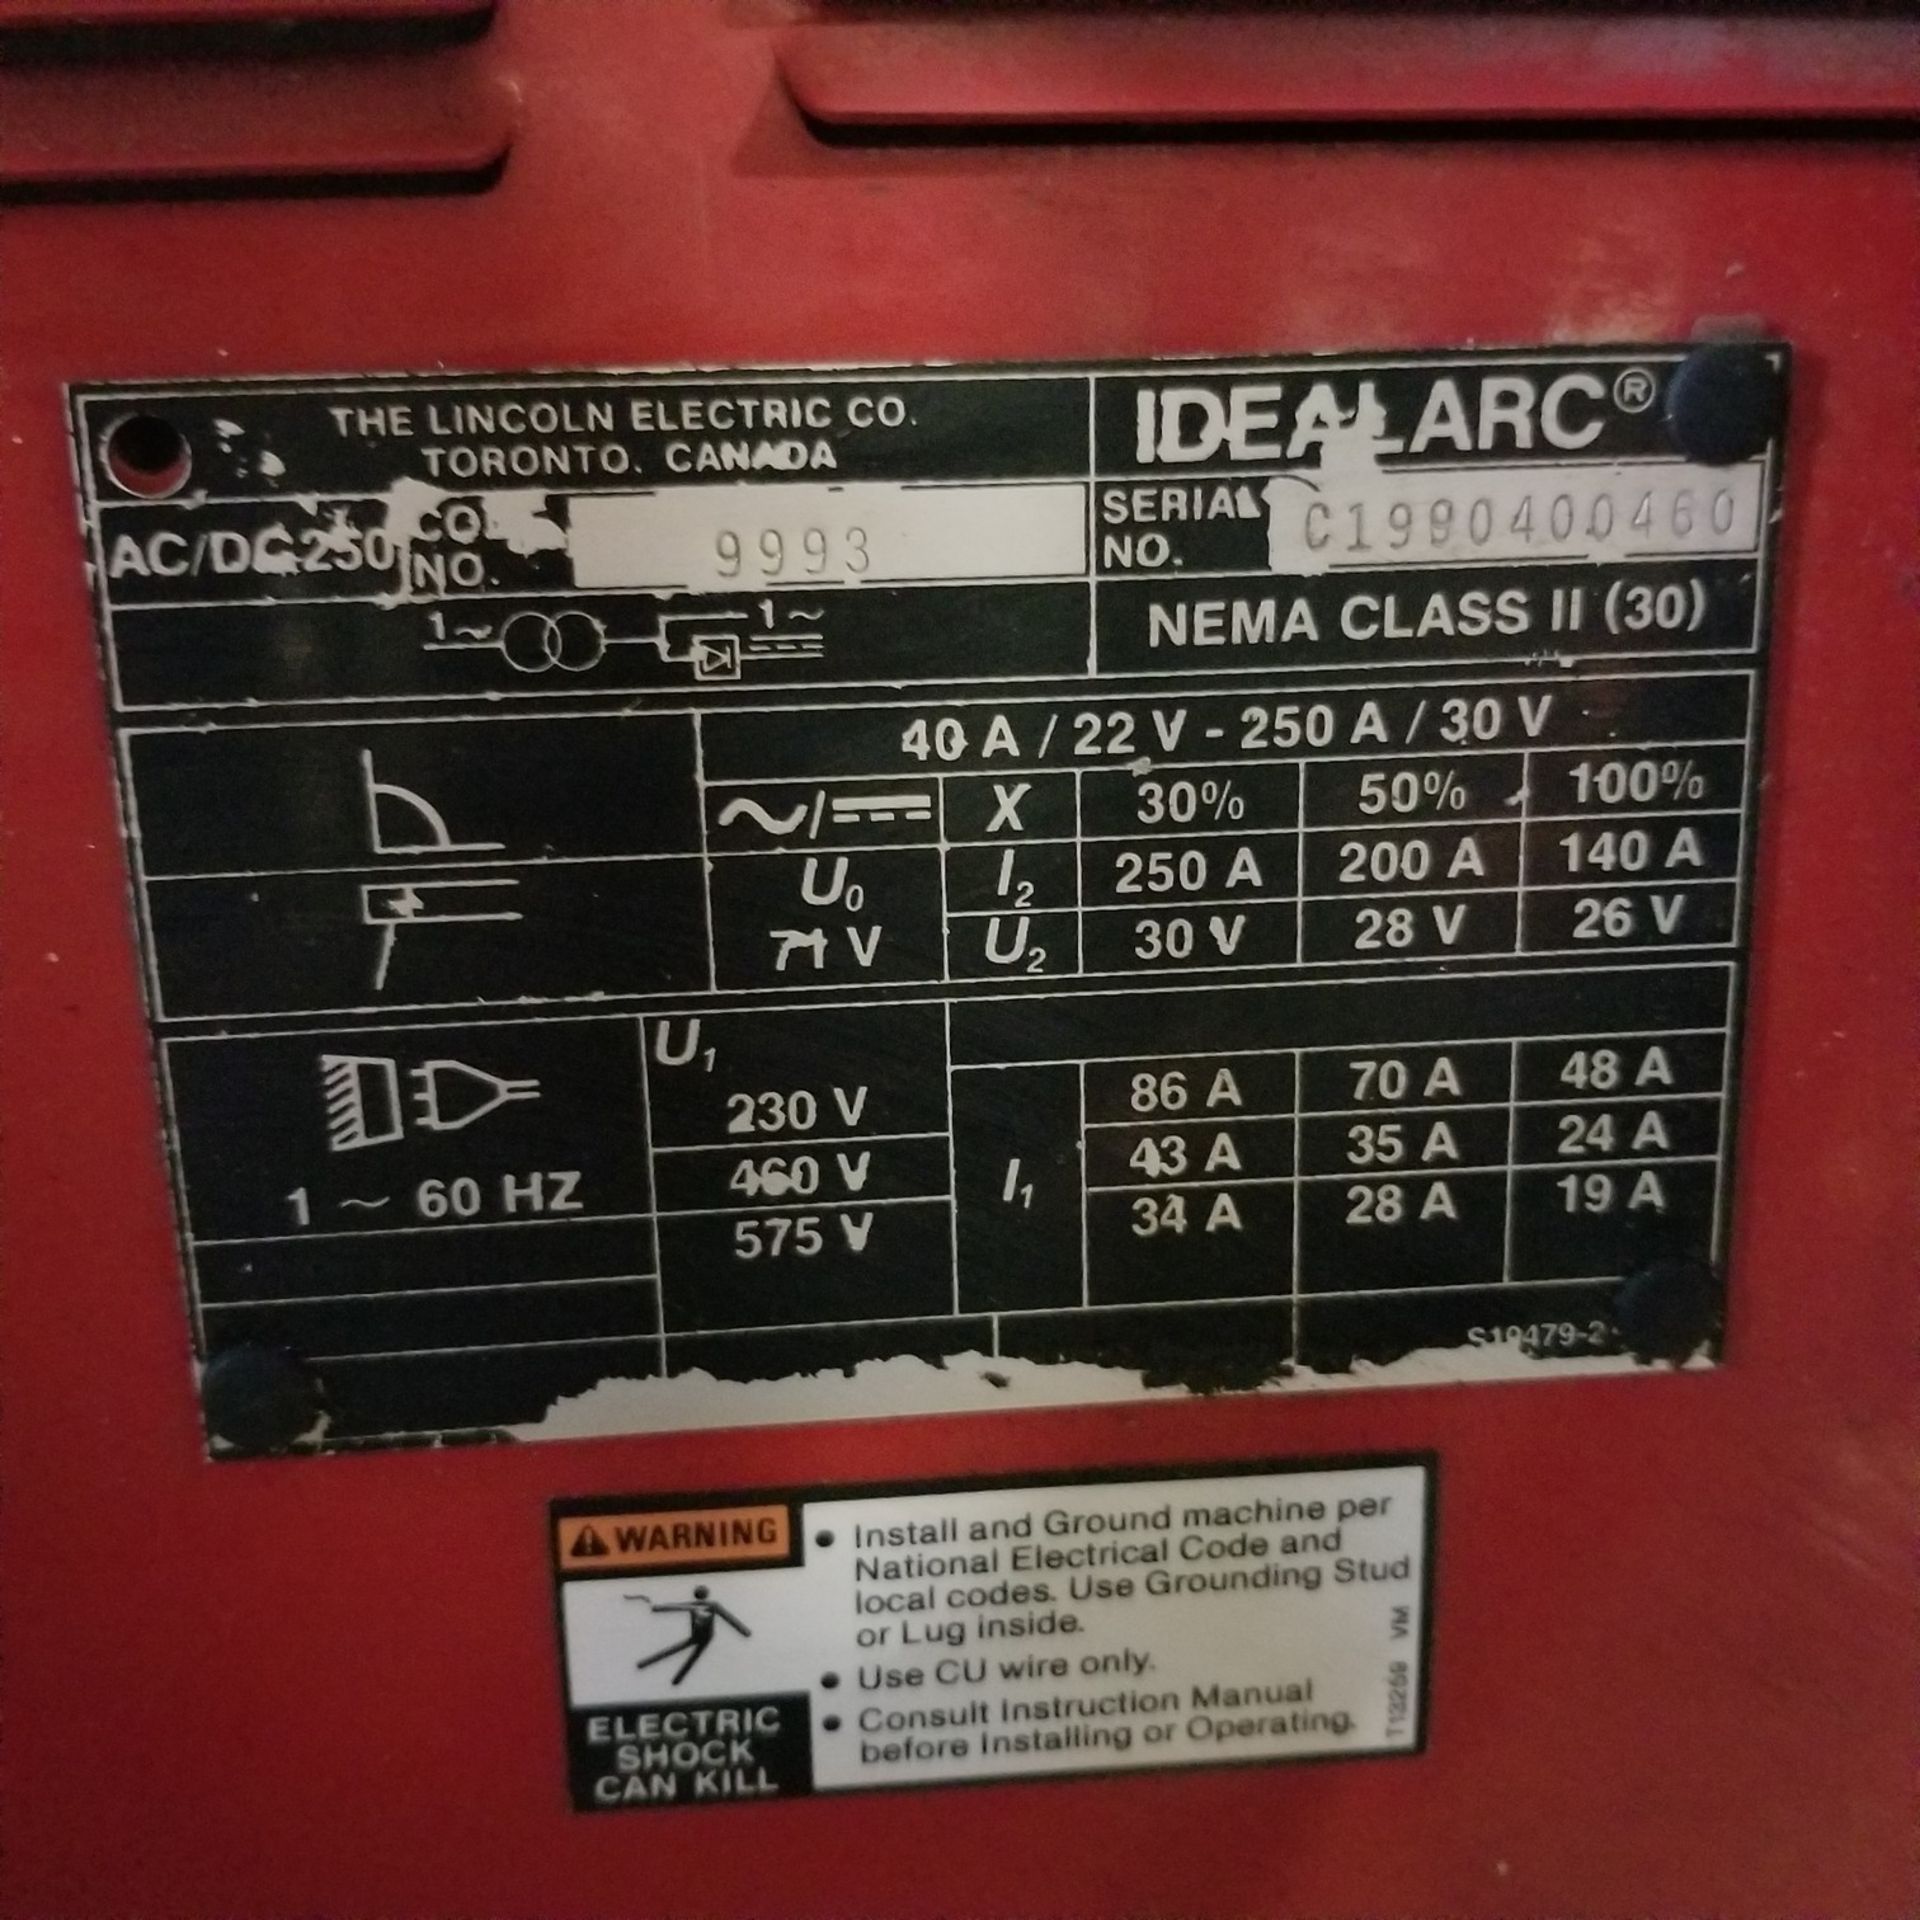 LINCOLN ELECTRIC, IDEALARC 250 WELDING AC/DC MACHINE S/N: C1990400460 - Image 4 of 4